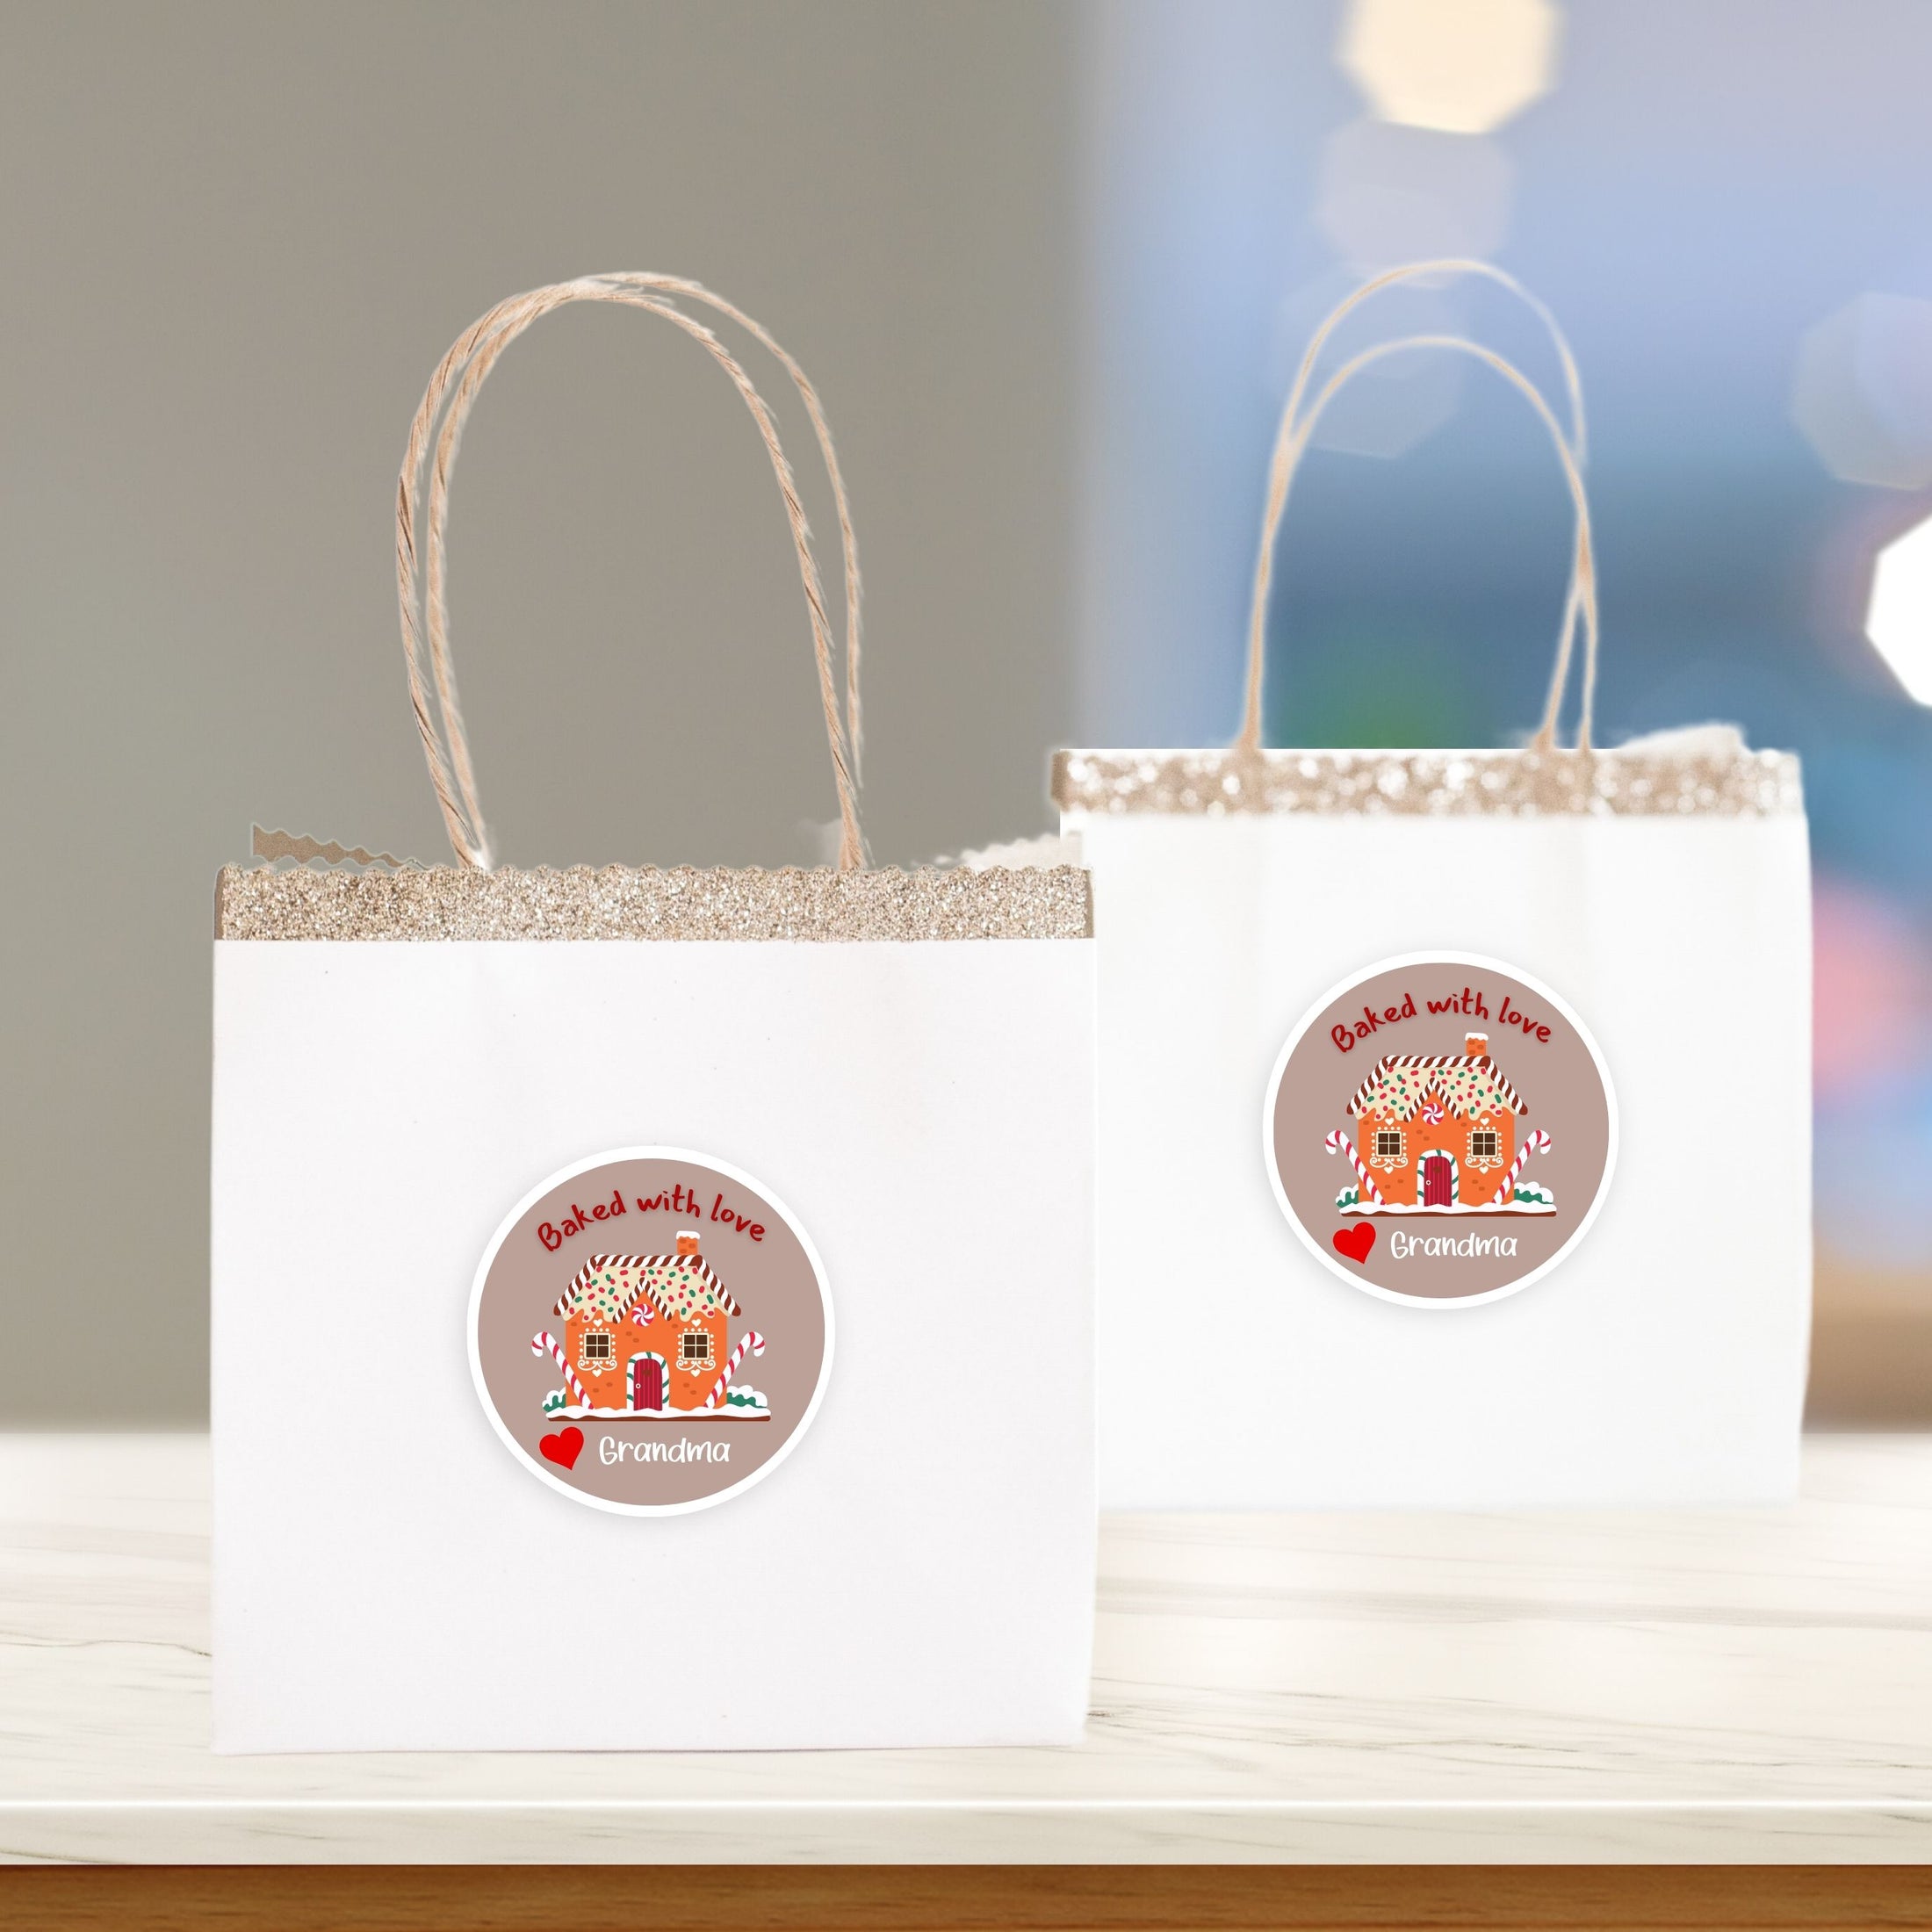 This image shows the personalized holiday stickers on two bags.